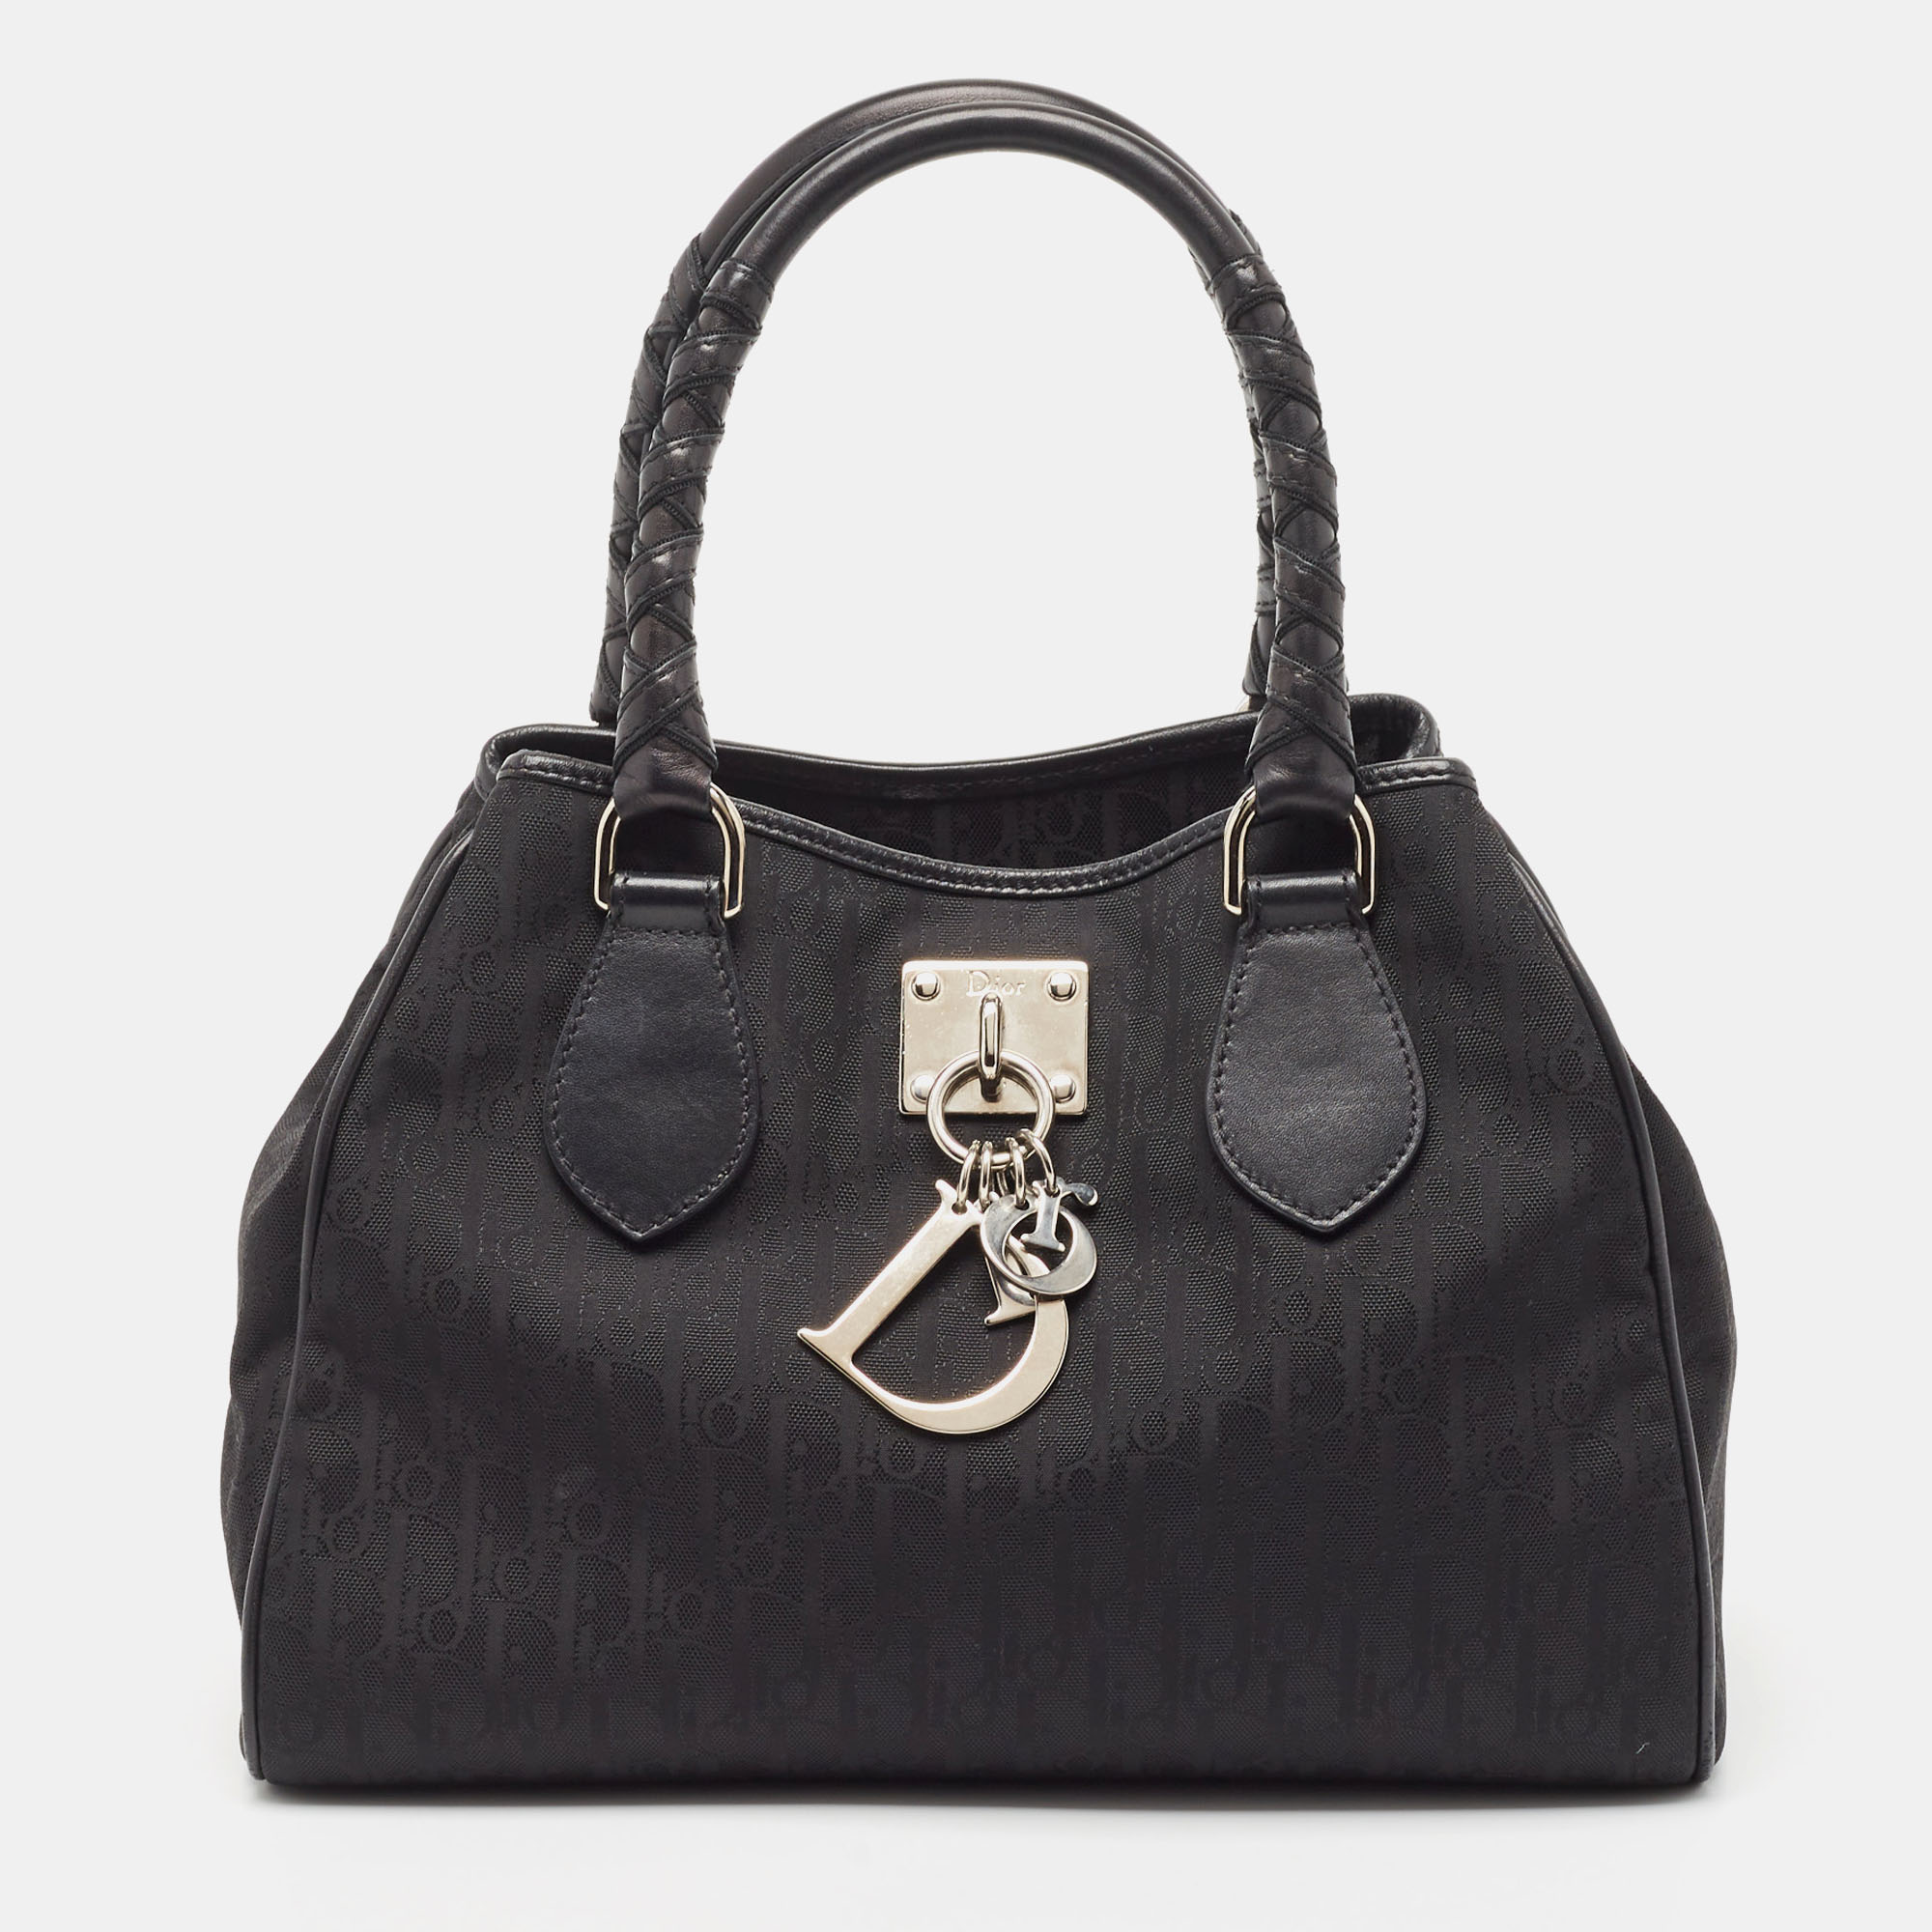 Dior Black Diorissimo Canvas And Leather Charming Satchel